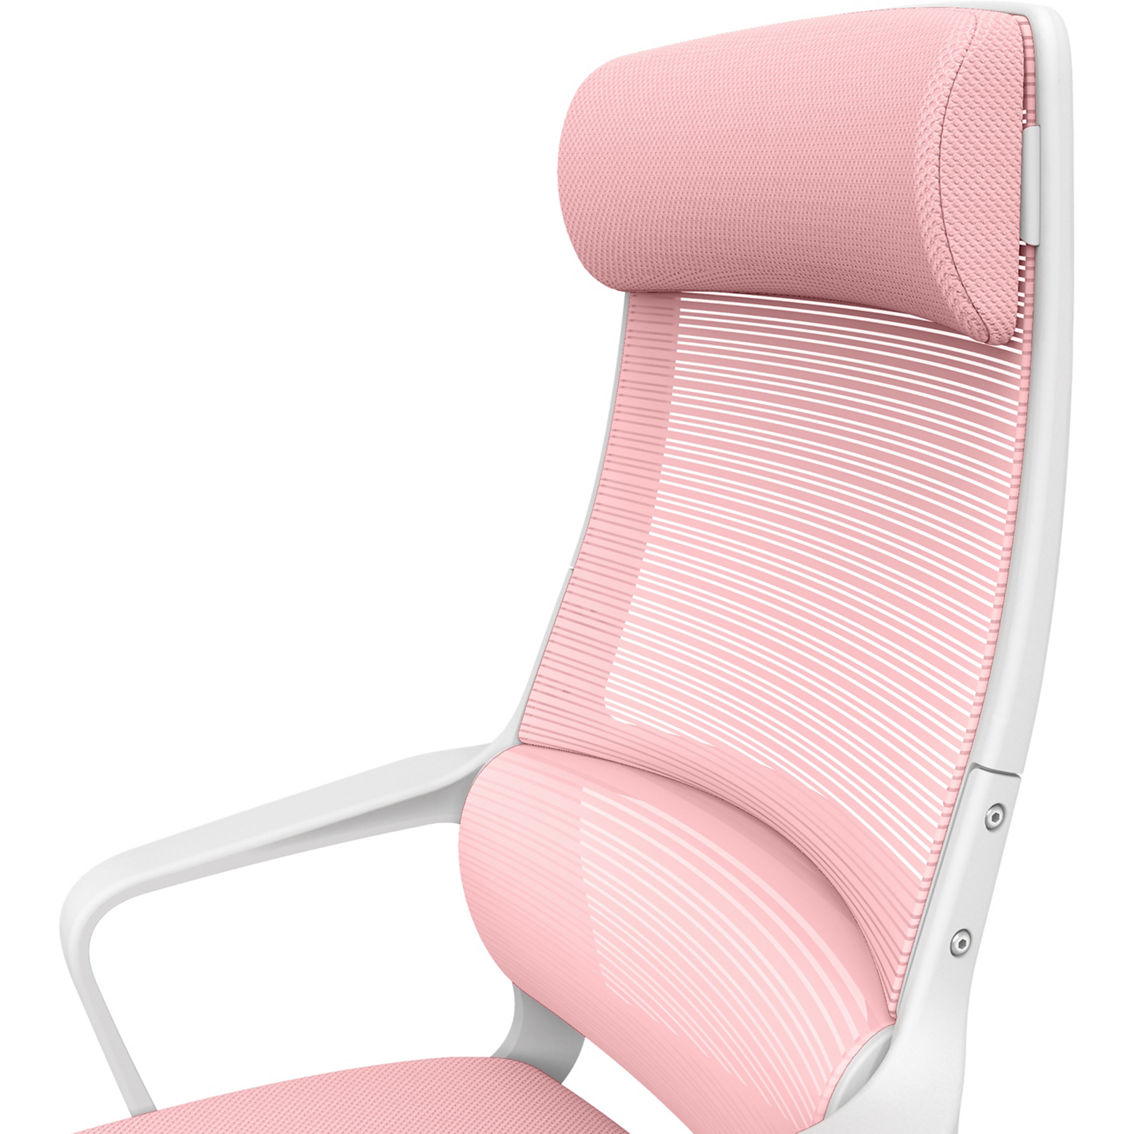 Furniture of America Tilih Pink-White Mesh Office Chair - Image 2 of 3